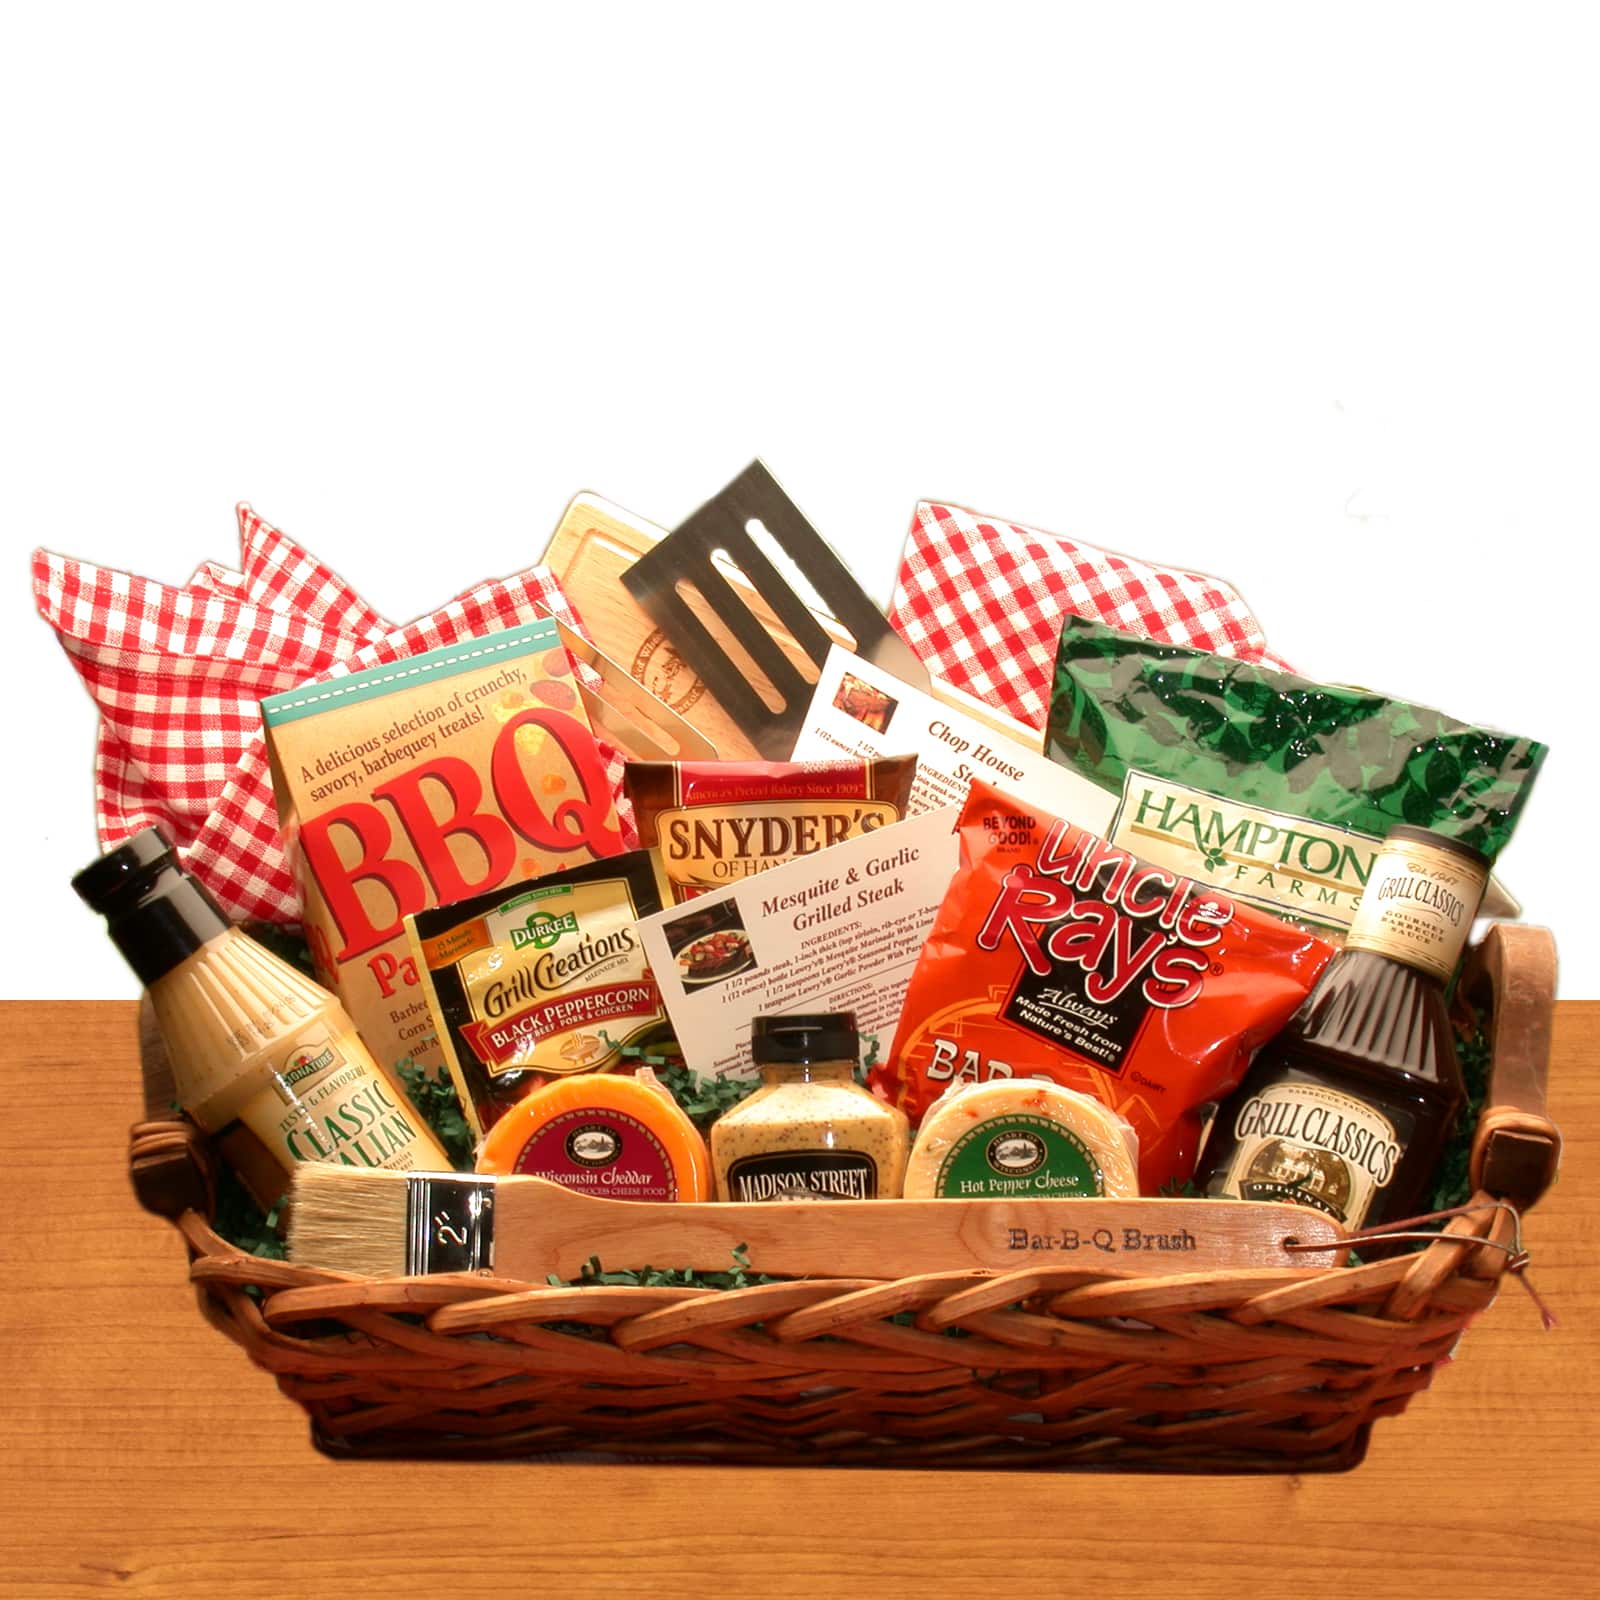 The Master Of The Grill Gift Basket - Gift Baskets for Delivery